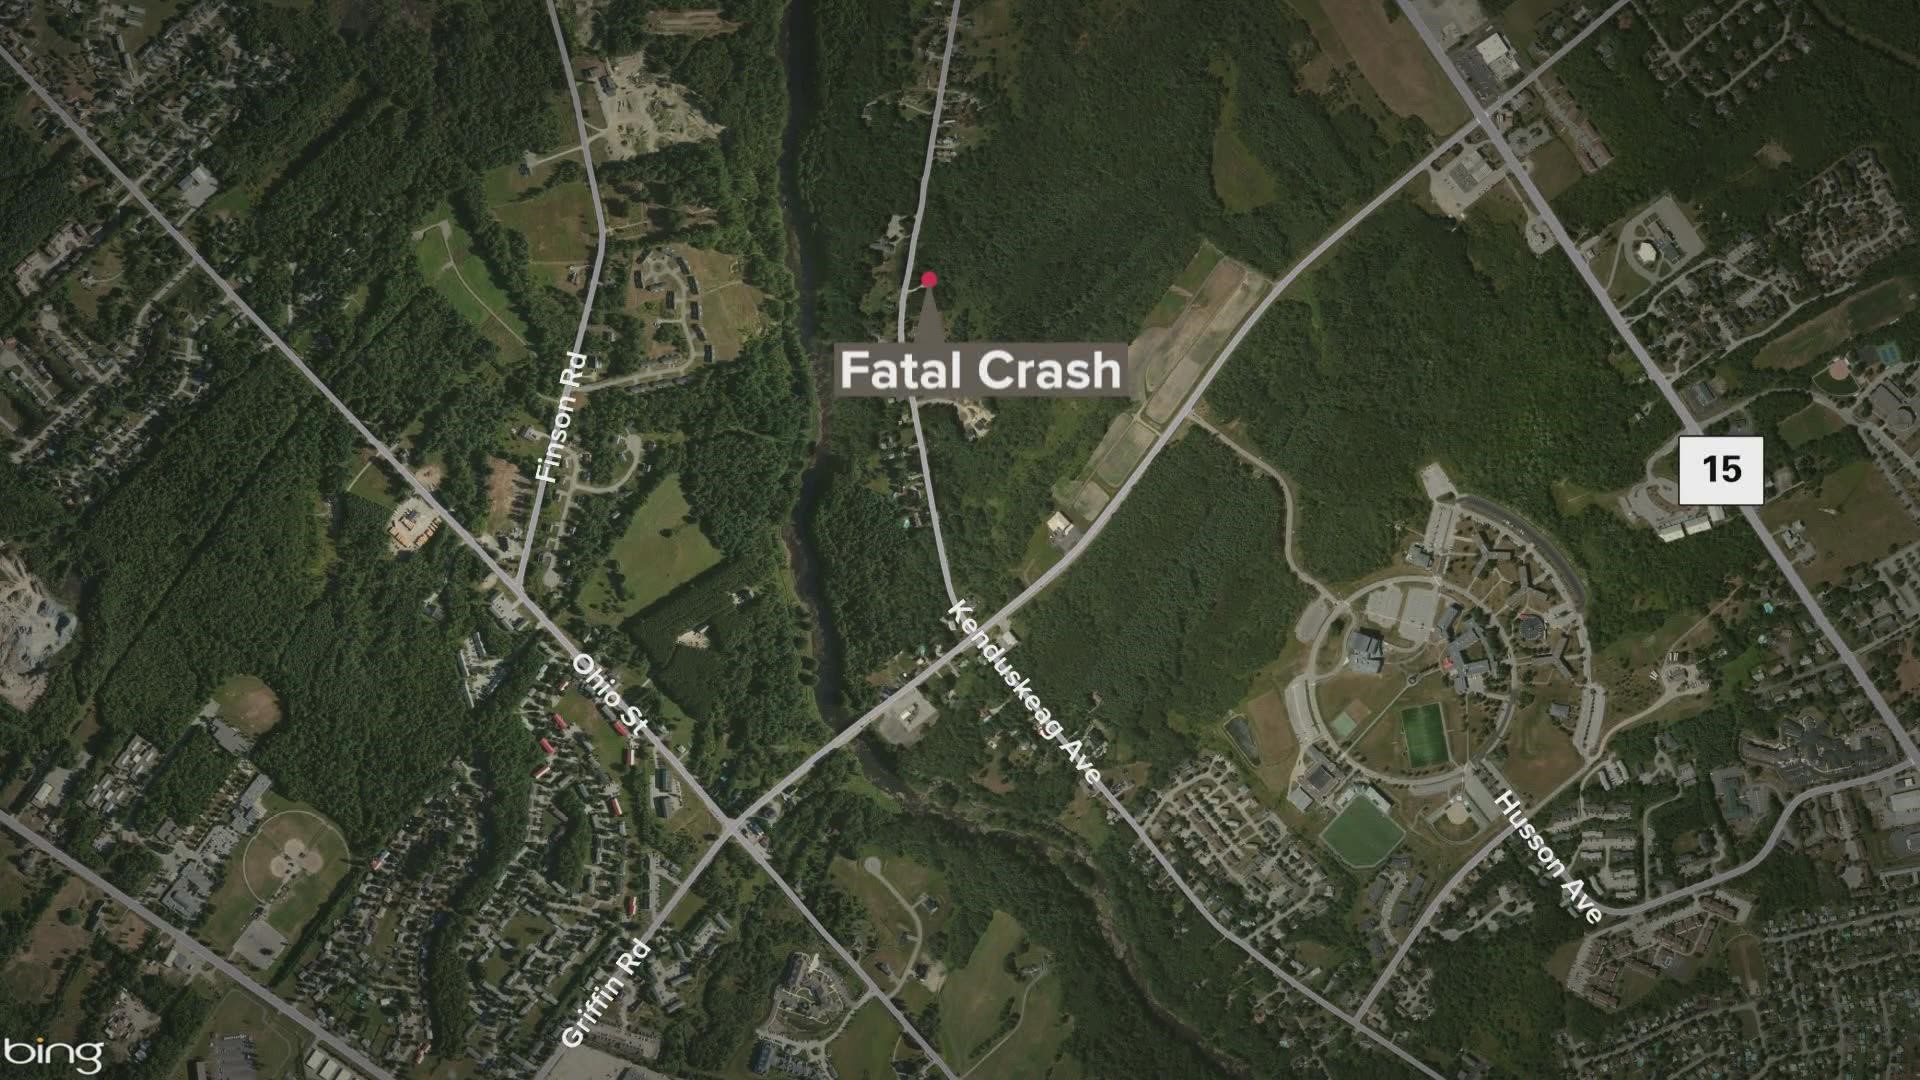 The drivers of two vehicles that crashed early Saturday morning died at the scene, police said.